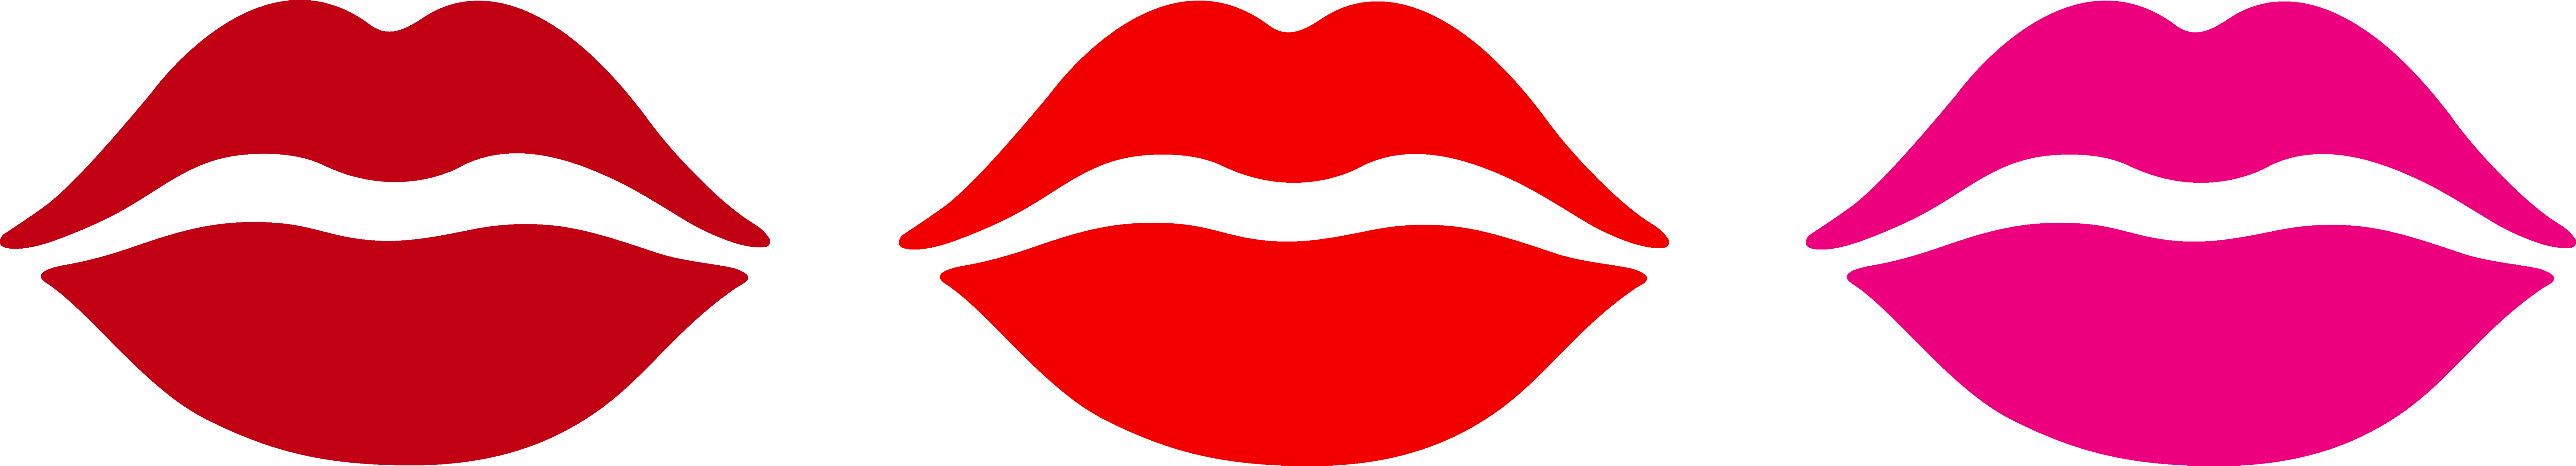 Cartoon Kissing Lips Clipart - Free to use Clip Art Resource - ClipArt Best  - ClipArt Best